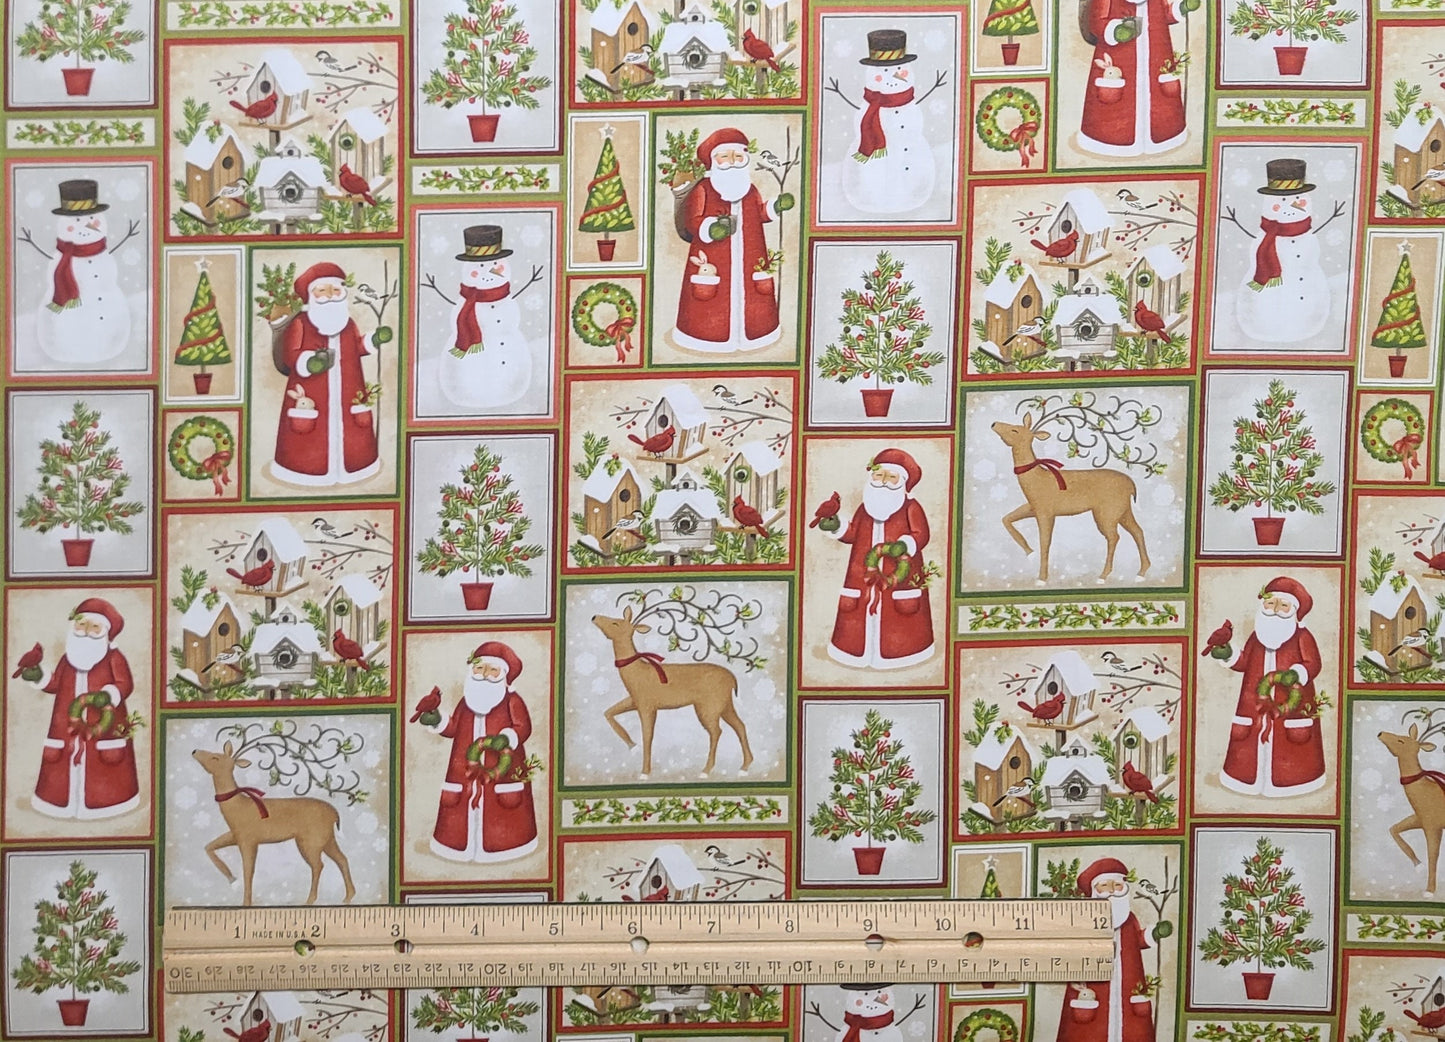 Maker's Holiday Fabric Exclusively for JoAnn Fabrics Printed in South Korea - Christmas Block Fabric